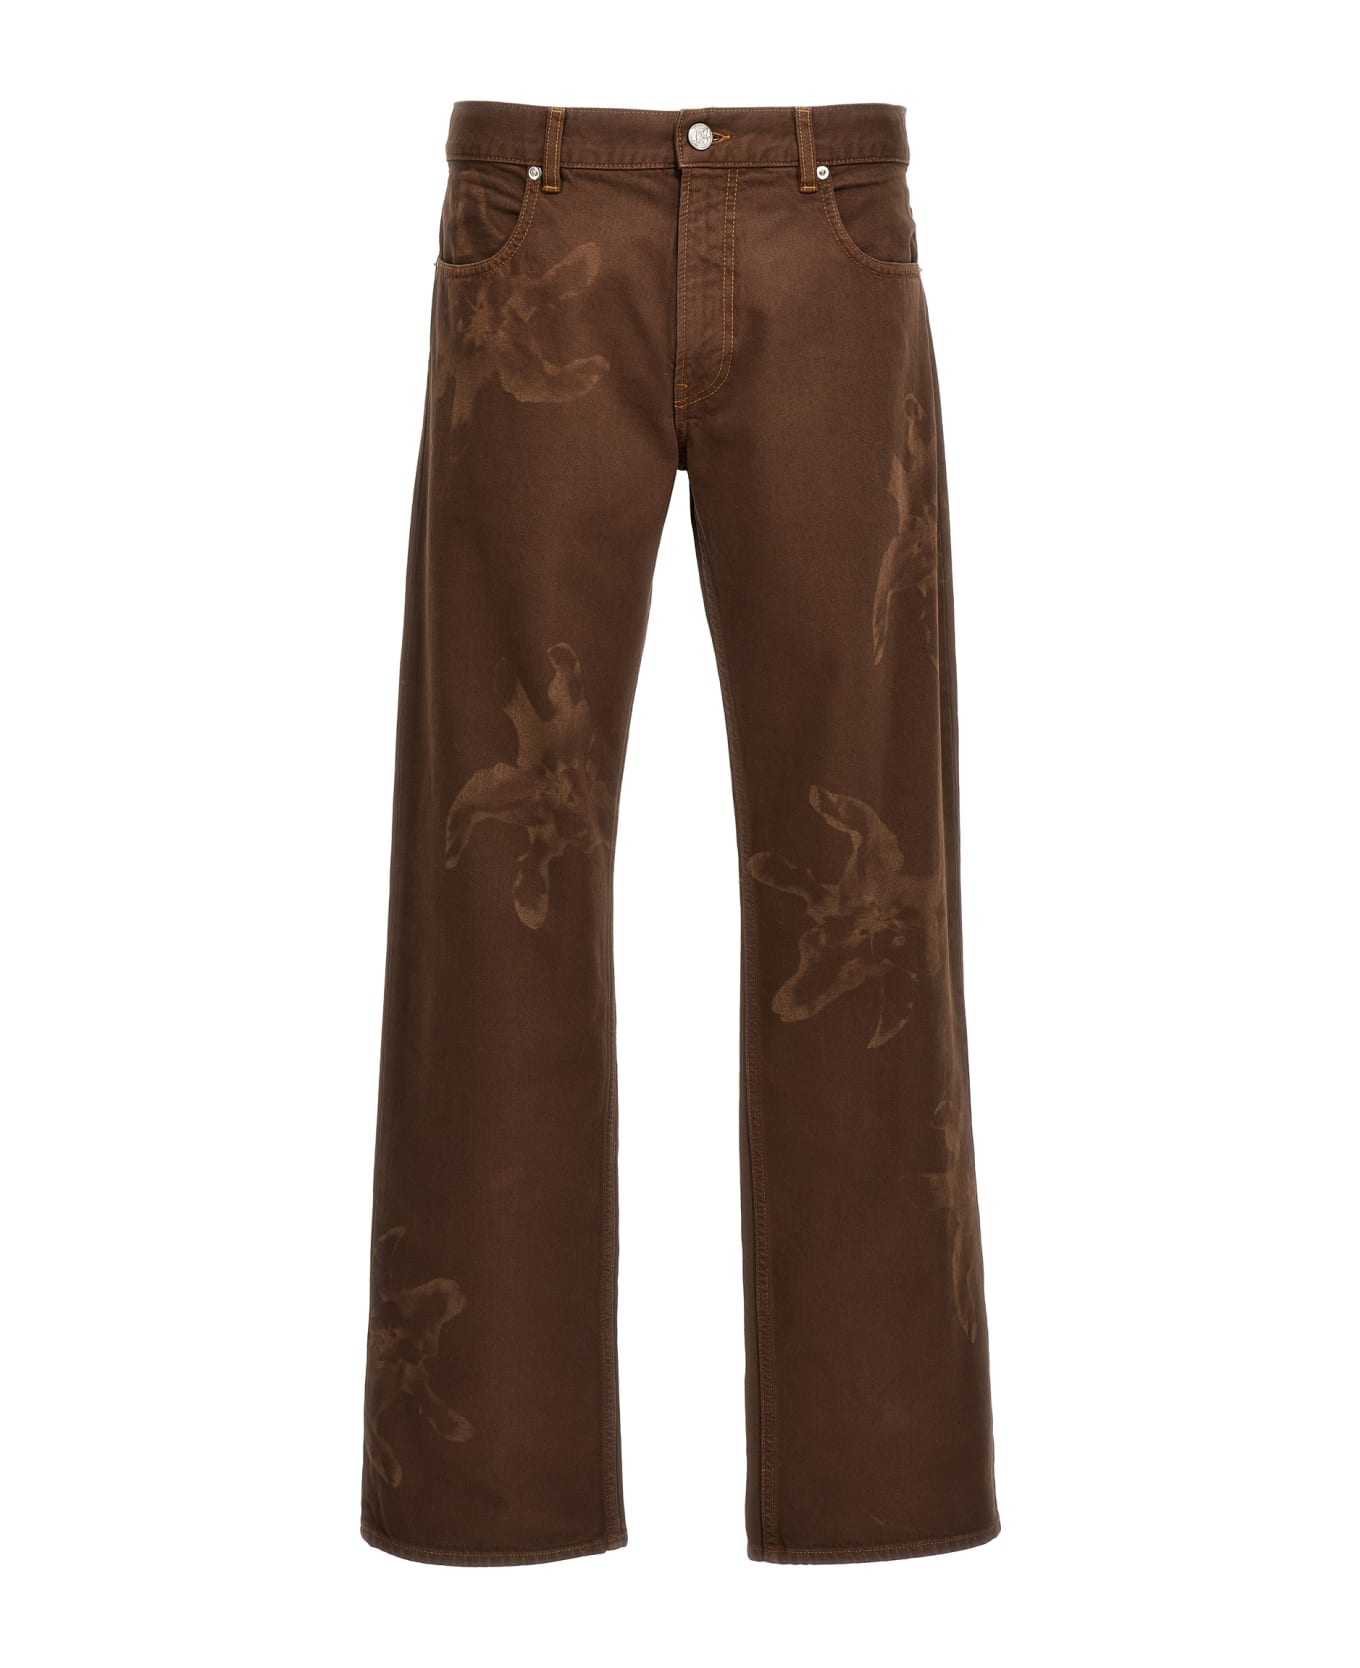 Bluemarble 'flower' Jeans - Brown ボトムス